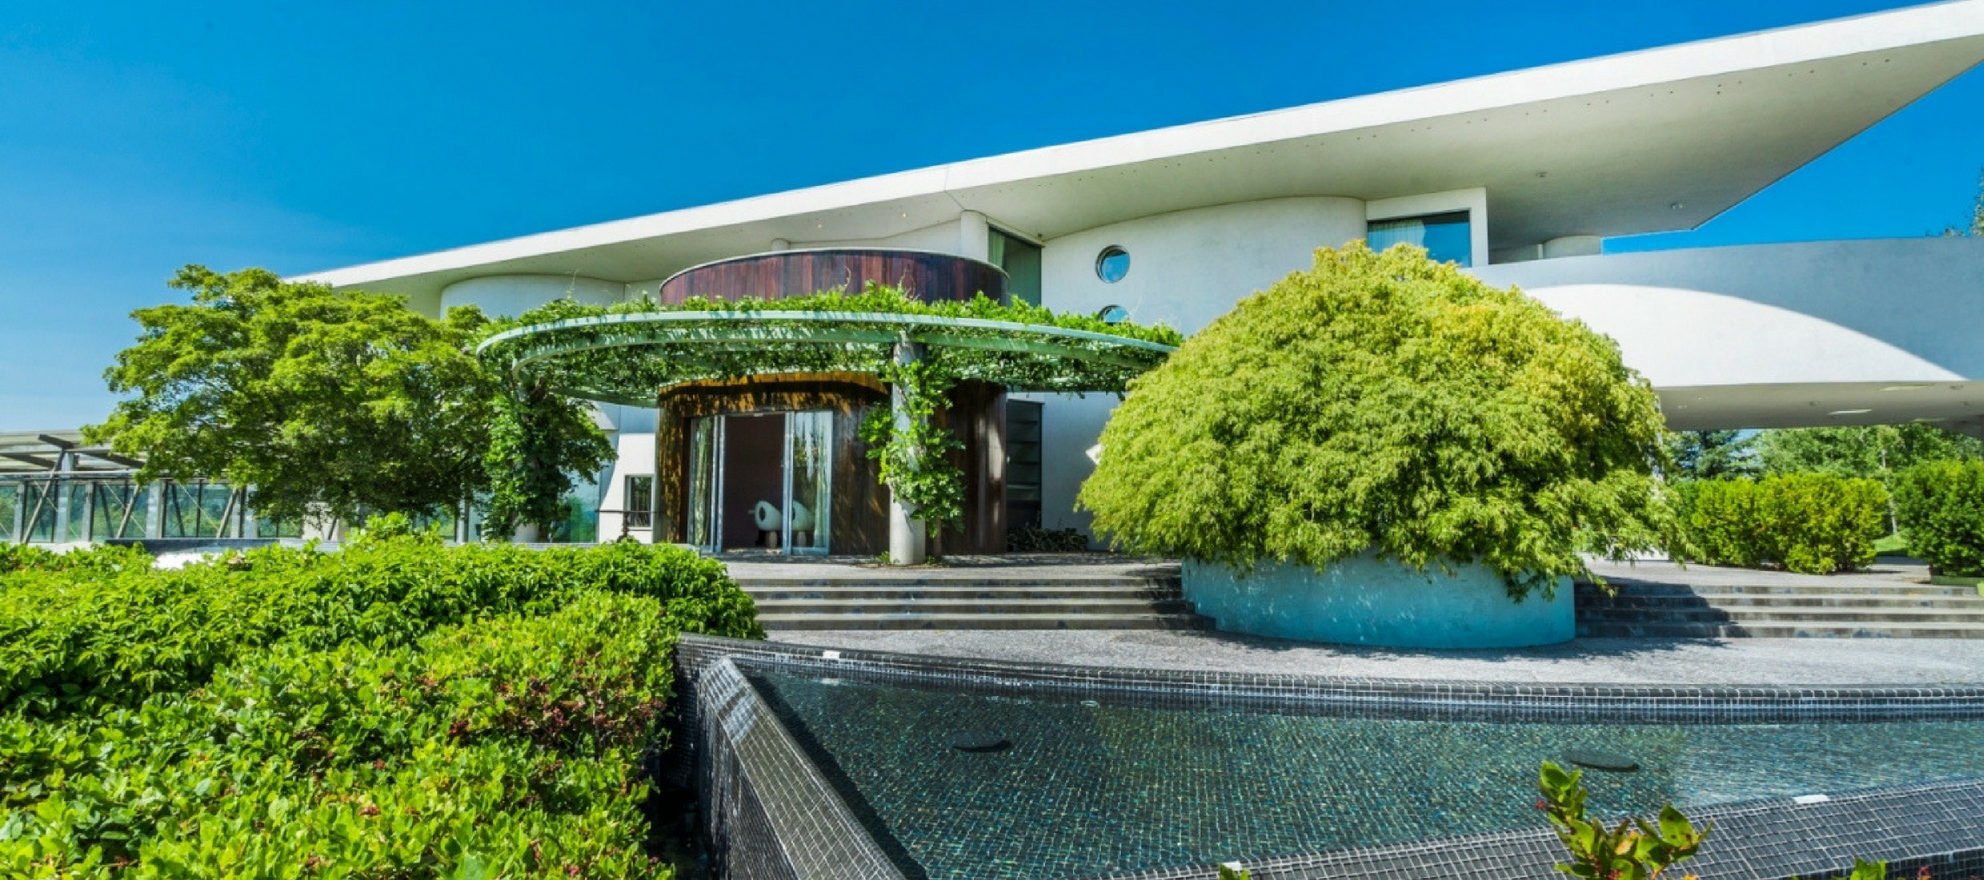 Connect mind, body and spirit in this $11M eco-chic luxury estate